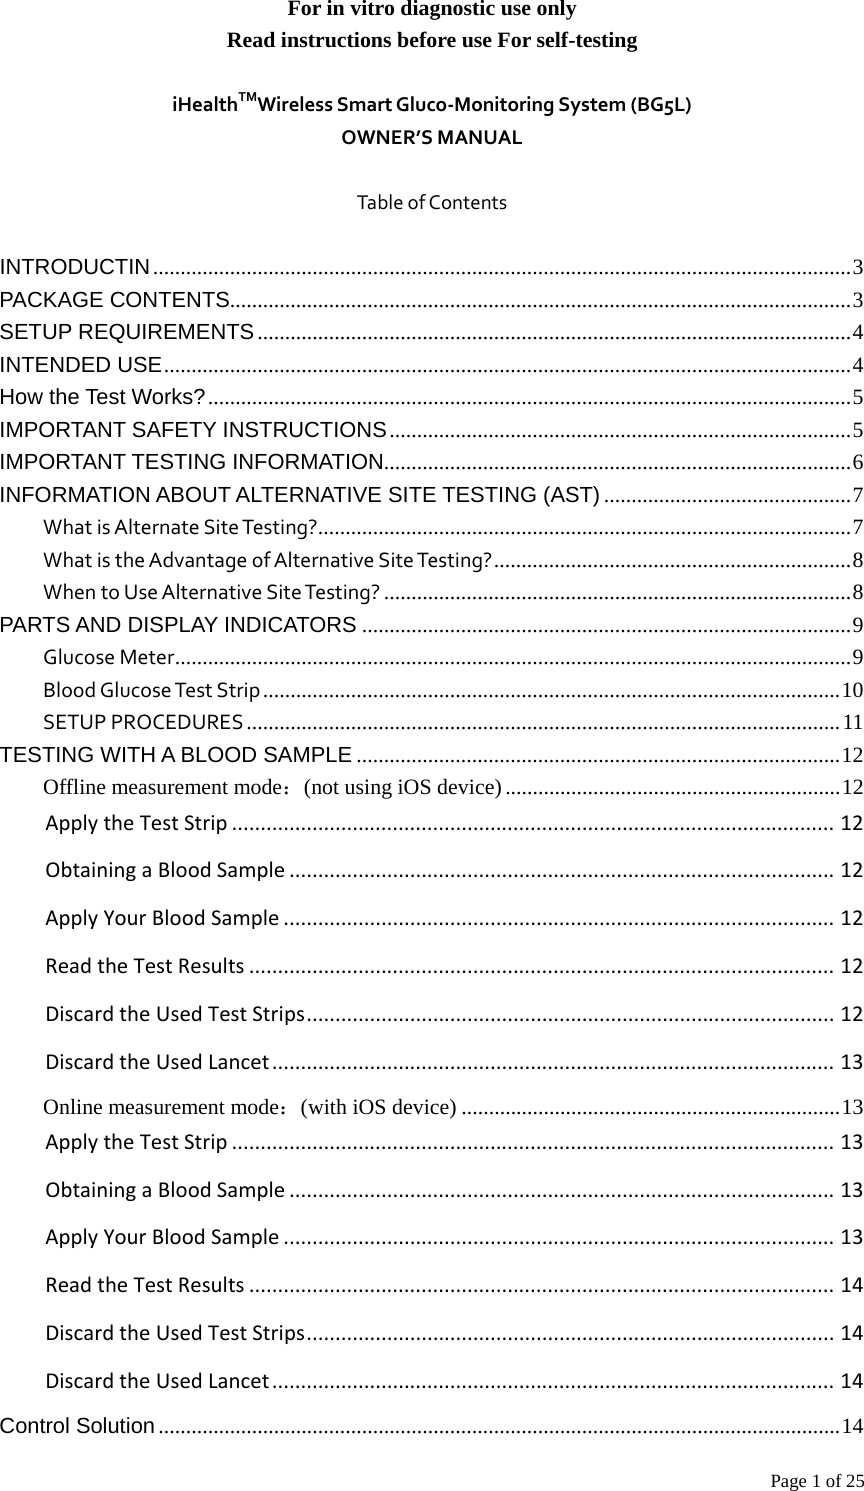 Page 1 of 25 For in vitro diagnostic use only Read instructions before use For self-testing iHealthTMWirelessSmartGluco‐MonitoringSystem(BG5L)OWNER’SMANUALTableofContentsINTRODUCTIN ............................................................................................................................... 3PACKAGE CONTENTS................................................................................................................. 3SETUP REQUIREMENTS ............................................................................................................ 4INTENDED USE ............................................................................................................................. 4How the Test Works? ..................................................................................................................... 5IMPORTANT SAFETY INSTRUCTIONS .................................................................................... 5IMPORTANT TESTING INFORMATION ..................................................................................... 6INFORMATION ABOUT ALTERNATIVE SITE TESTING (AST) ............................................. 7WhatisAlternateSiteTesting? .................................................................................................  7WhatistheAdvantageofAlternativeSiteTesting? ................................................................. 8WhentoUseAlternativeSiteTesting? ..................................................................................... 8PARTS AND DISPLAY INDICATORS ......................................................................................... 9GlucoseMeter ........................................................................................................................... 9BloodGlucoseTestStrip ......................................................................................................... 10SETUPPROCEDURES ............................................................................................................ 11TESTING WITH A BLOOD SAMPLE ........................................................................................ 12Offline measurement mode：(not using iOS device) ............................................................. 12ApplytheTestStrip.........................................................................................................12ObtainingaBloodSample...............................................................................................12ApplyYourBloodSample................................................................................................12ReadtheTestResults......................................................................................................12DiscardtheUsedTestStrips............................................................................................12DiscardtheUsedLancet..................................................................................................13Online measurement mode：(with iOS device) ..................................................................... 13ApplytheTestStrip.........................................................................................................13ObtainingaBloodSample...............................................................................................13ApplyYourBloodSample................................................................................................13ReadtheTestResults......................................................................................................14DiscardtheUsedTestStrips............................................................................................14DiscardtheUsedLancet..................................................................................................14Control Solution ............................................................................................................................ 14